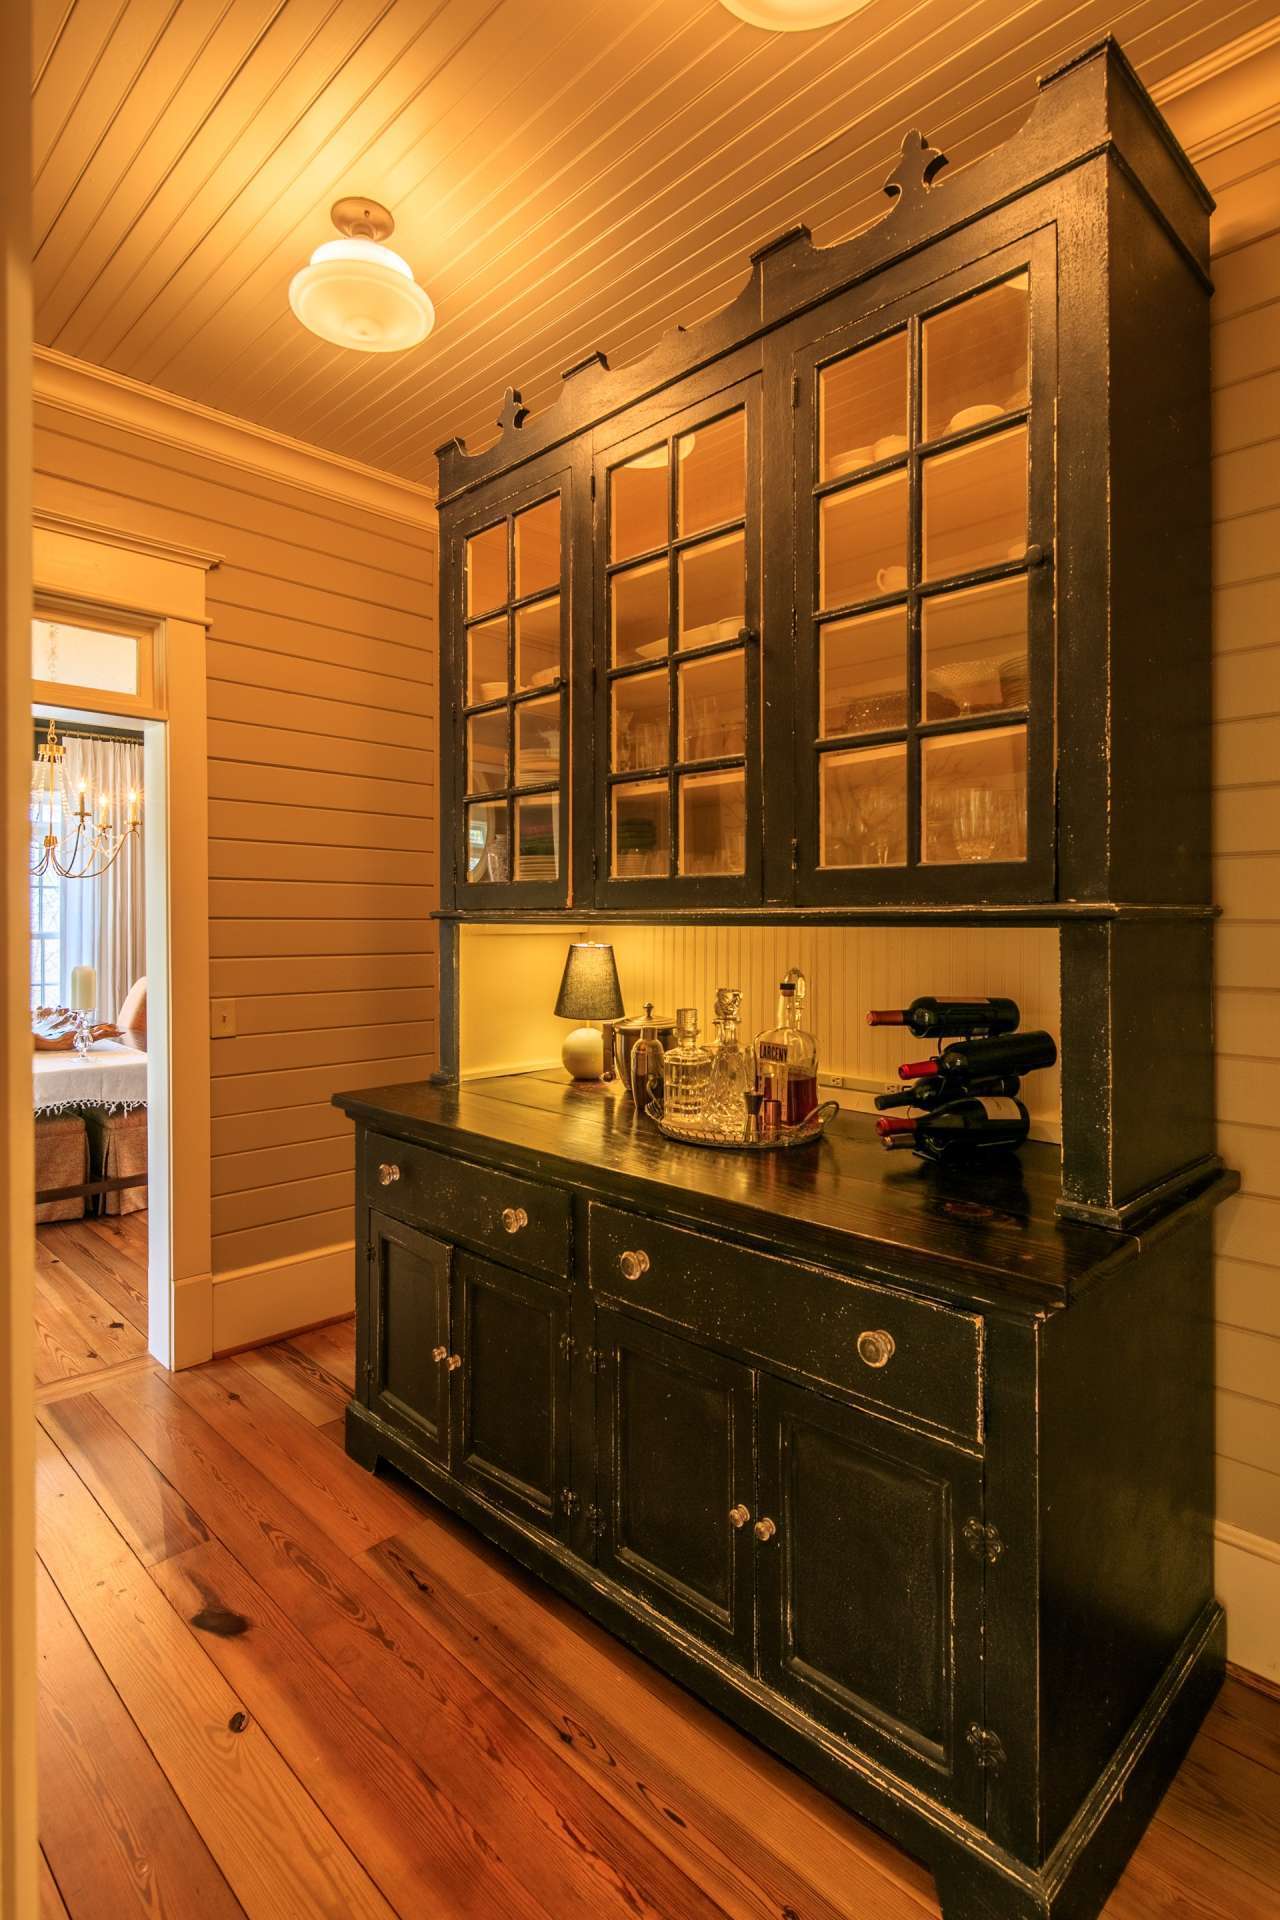 Conveniently located between the kitchen and dining room, the butler's pantry adds additional farmhouse style.